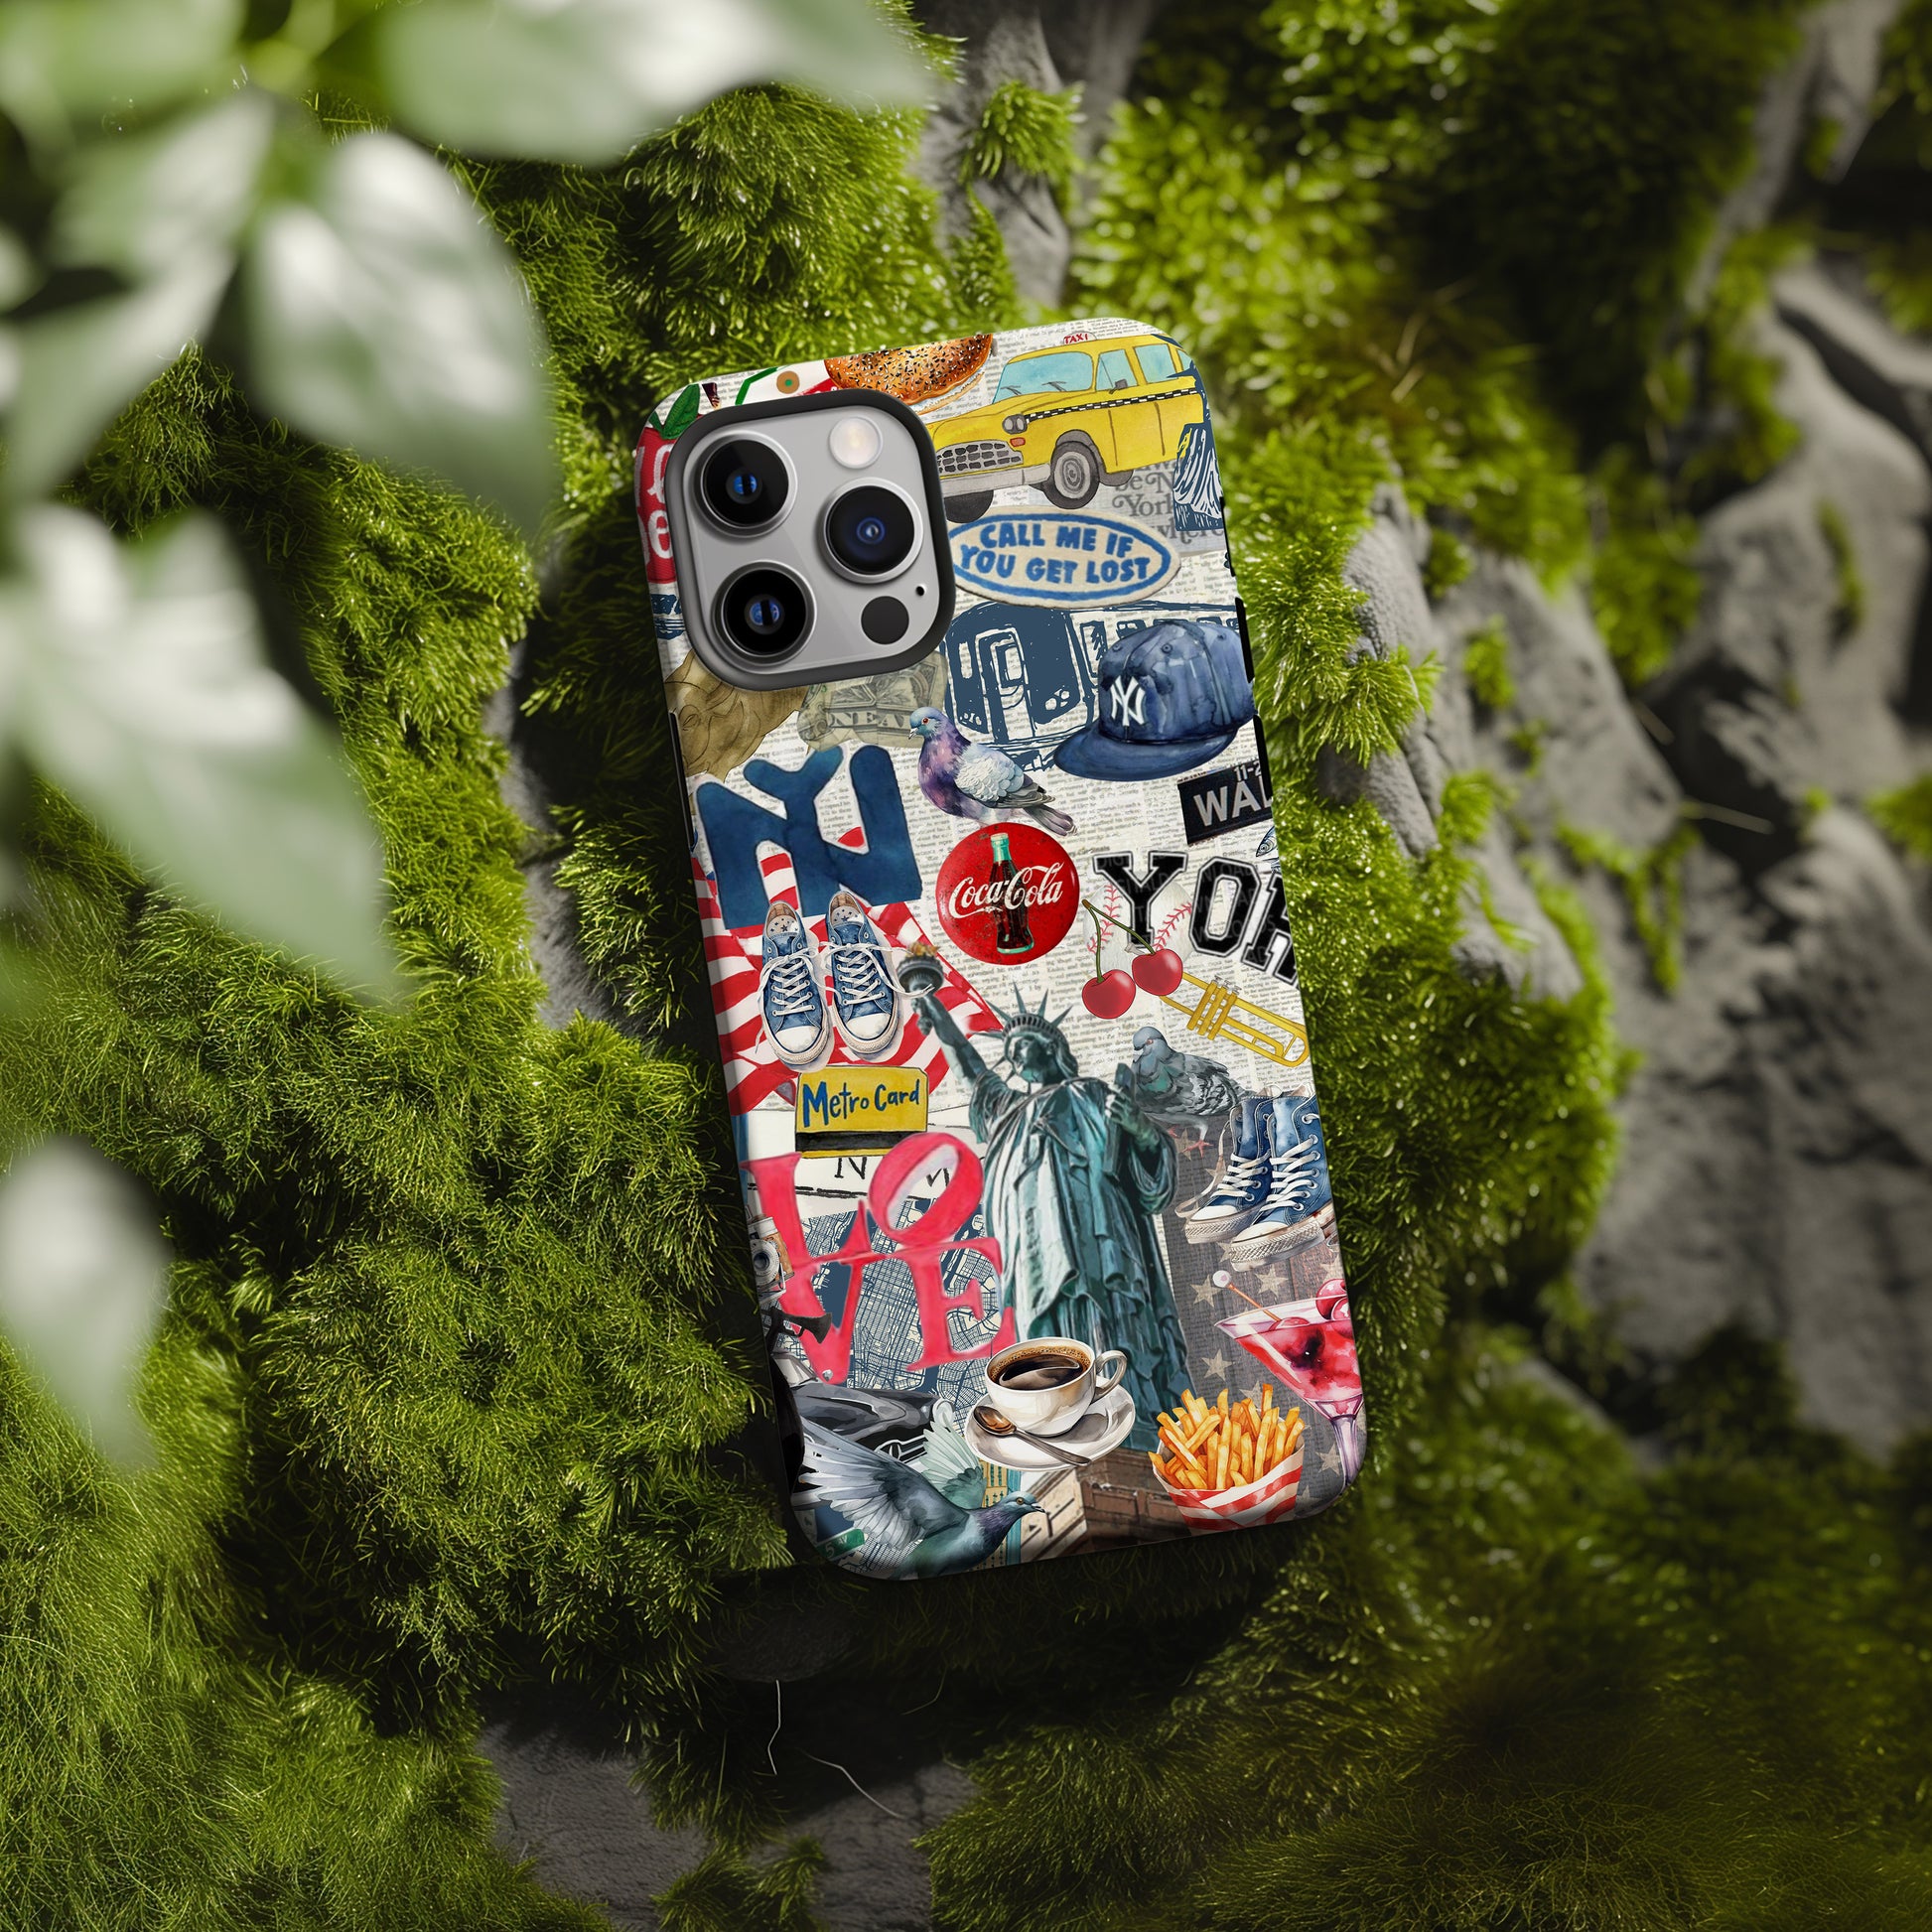 moss rock of NY City Collage Phone Case. Scrapbook style collage phone case. New York City phone case for iPhone and Samsung Galaxy by Artscape Market